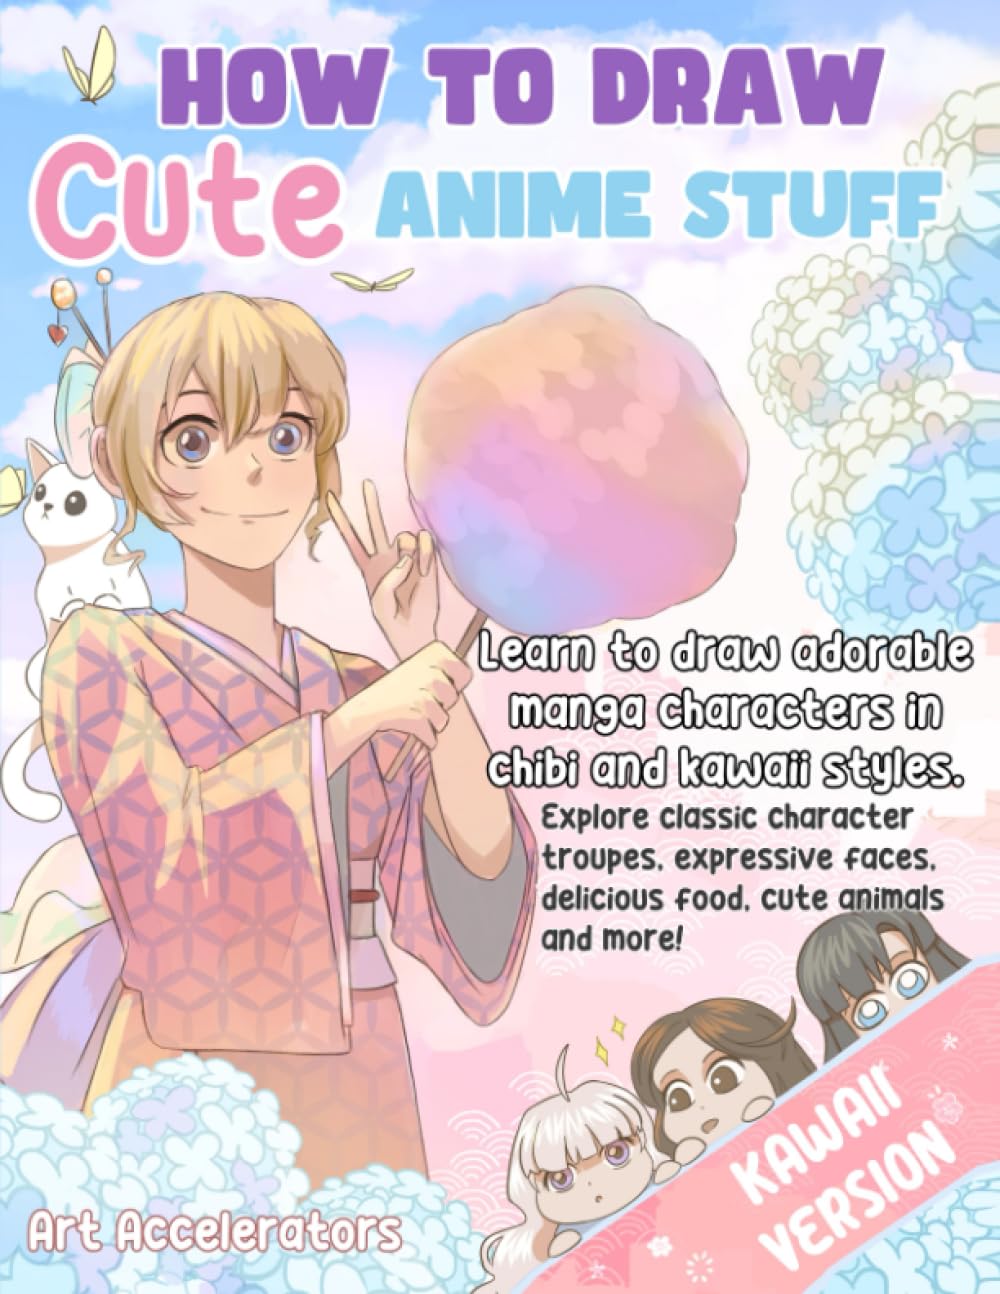 Is rightstufanime a completely legit site? : r/anime